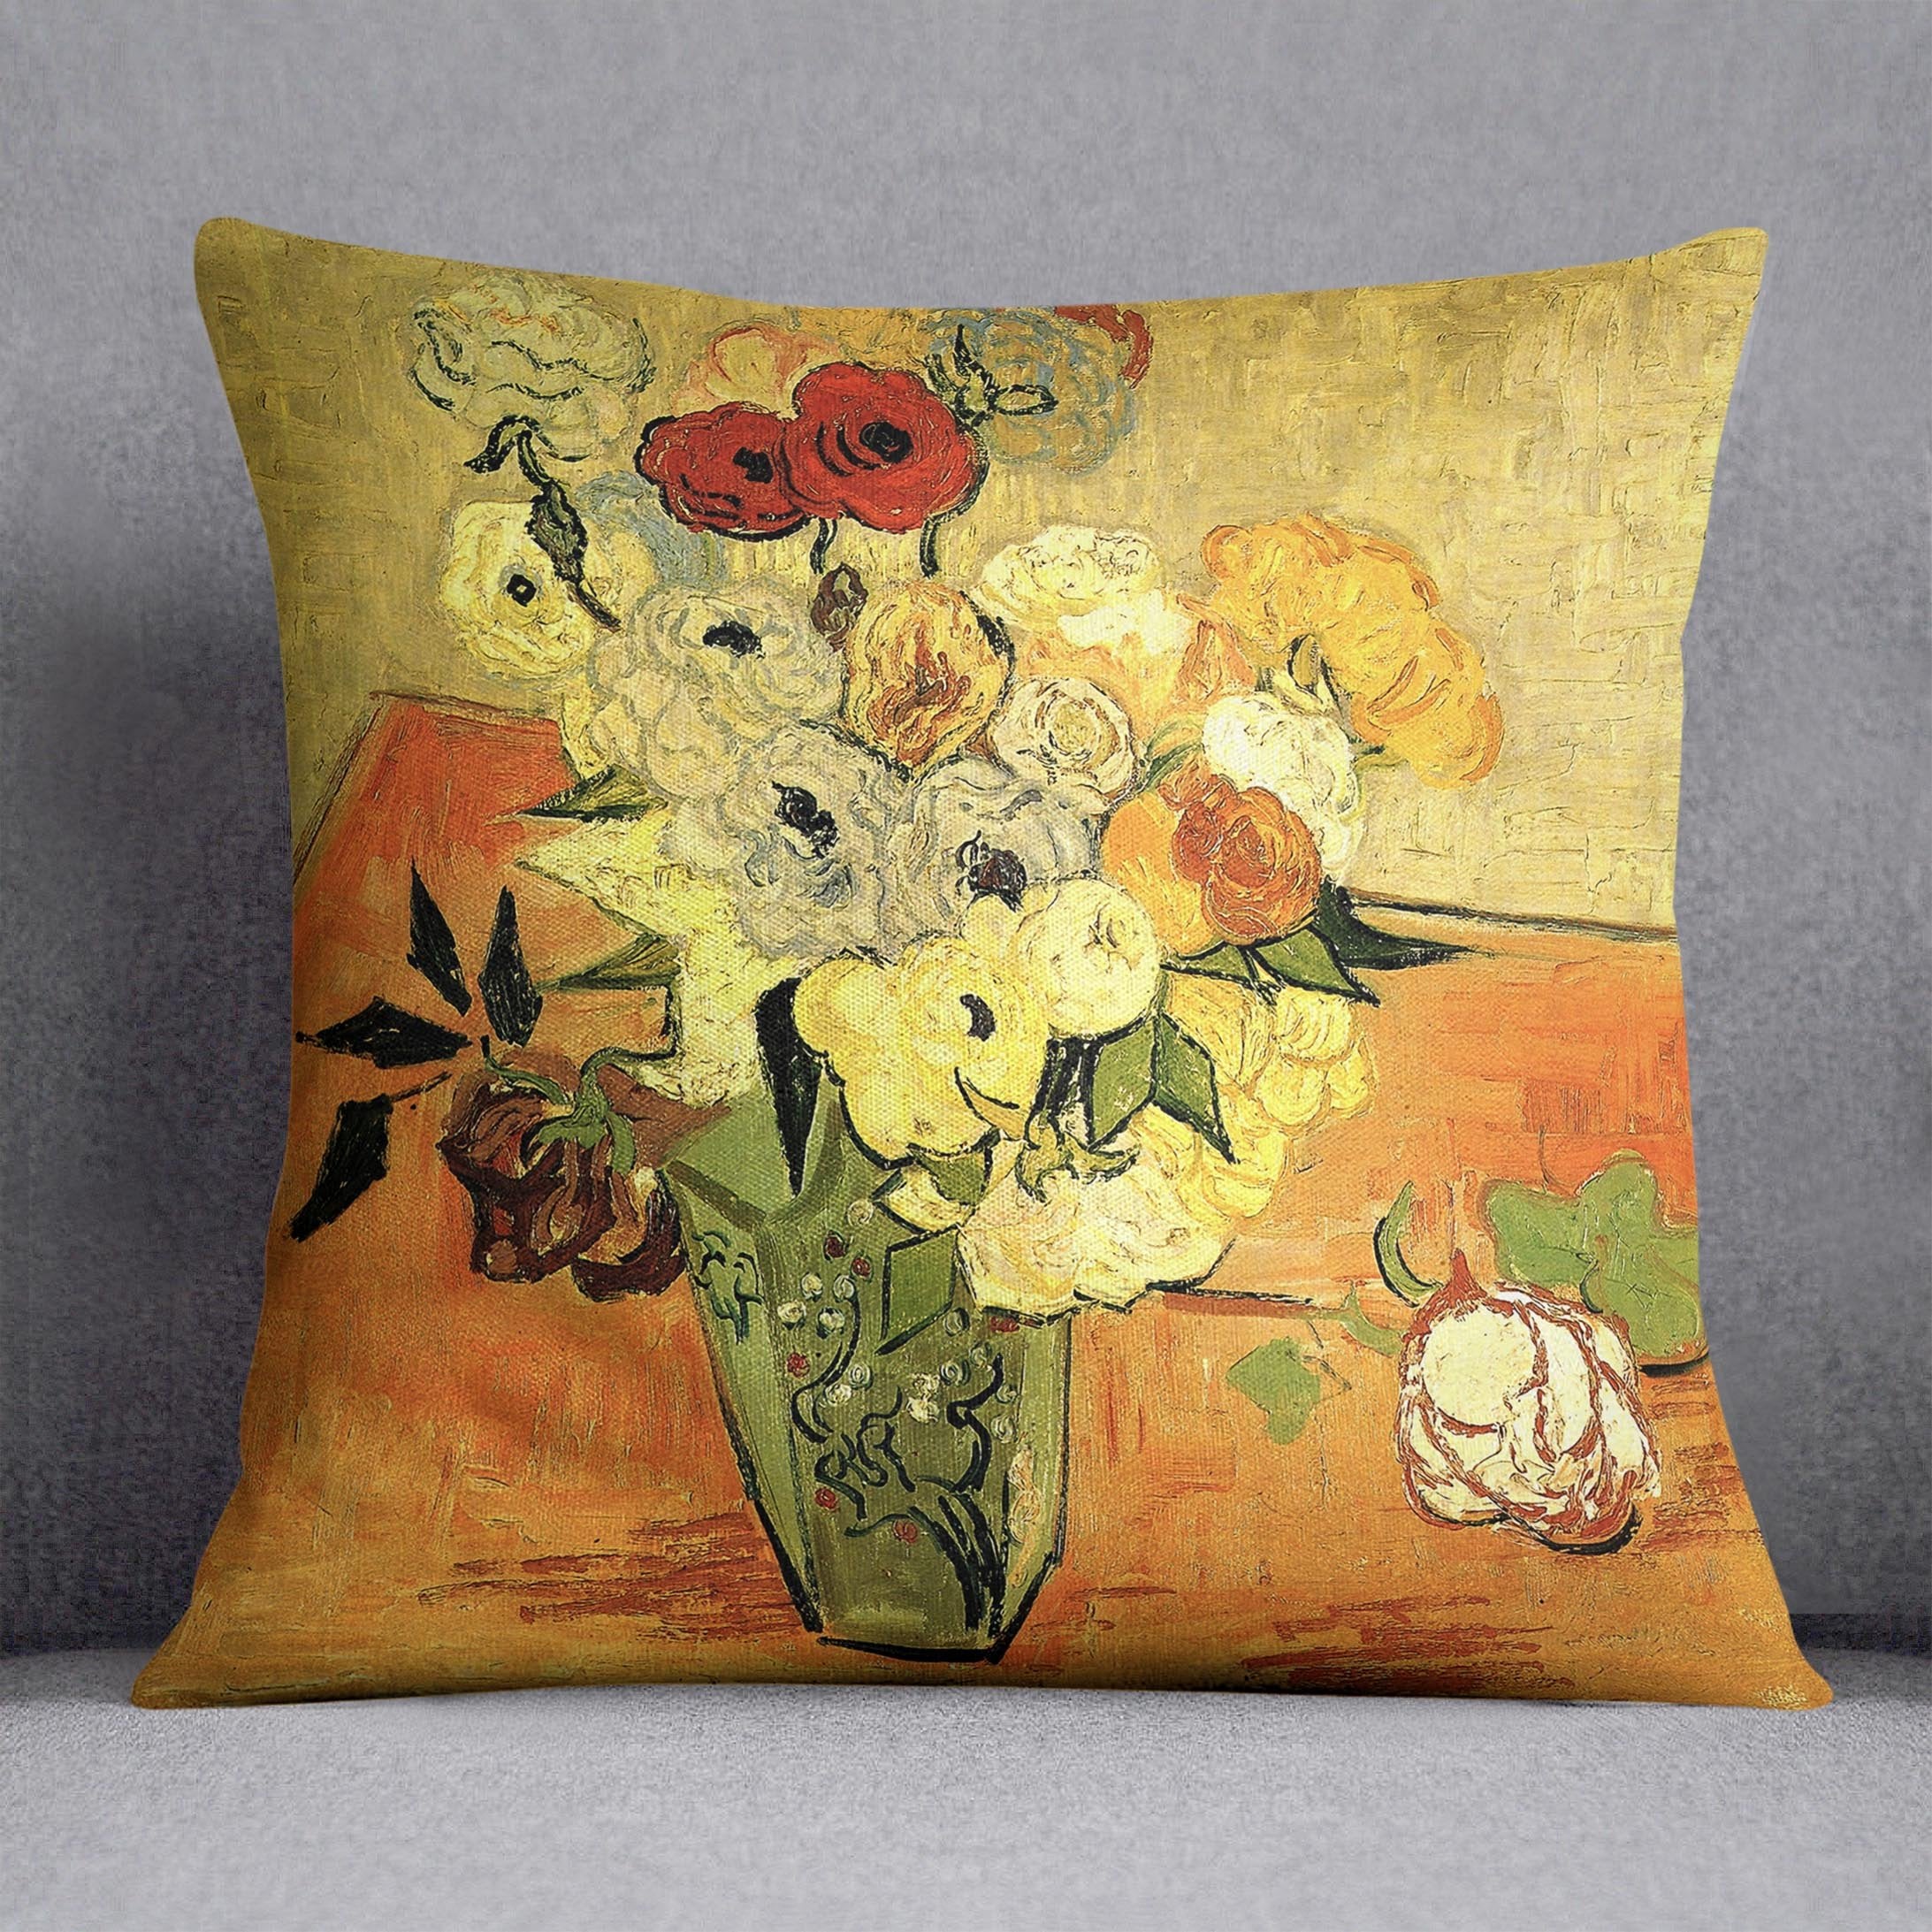 Still Life Japanese Vase with Roses and Anemones by Van Gogh Throw Pillow